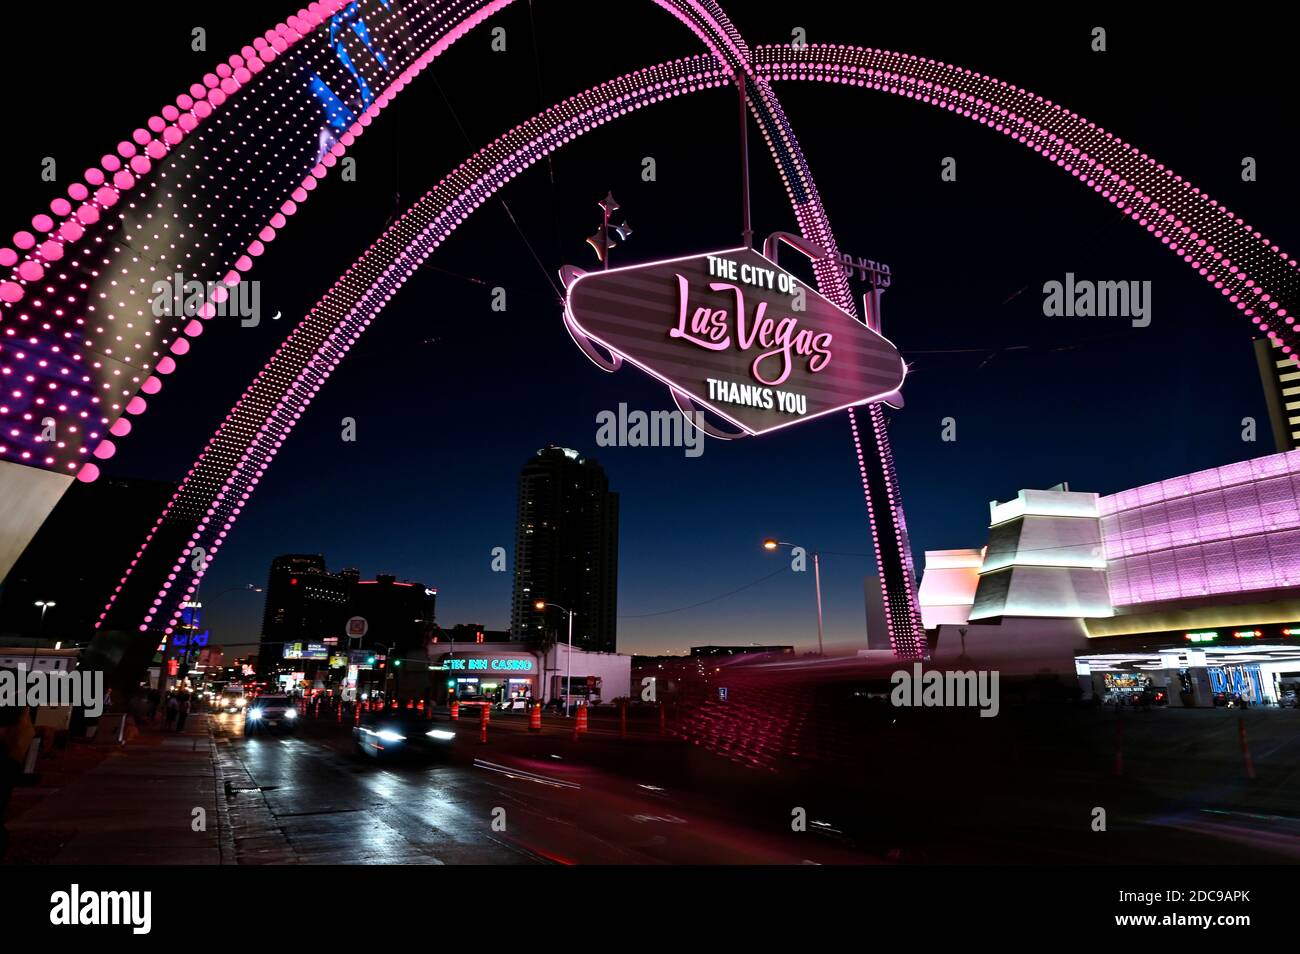 Las Vegas, Nevada, USA. 18th Nov, 2020. The Las Vegas Gateway Arches are seen illuminated along the Las Vegas Strip for the first time. The 80-foot tall arches, lighted with over 13,000 LED lights, stand as the entrance to the City of Las Vegas, downtown district. Credit: David Becker/ZUMA Wire/Alamy Live News Stock Photo